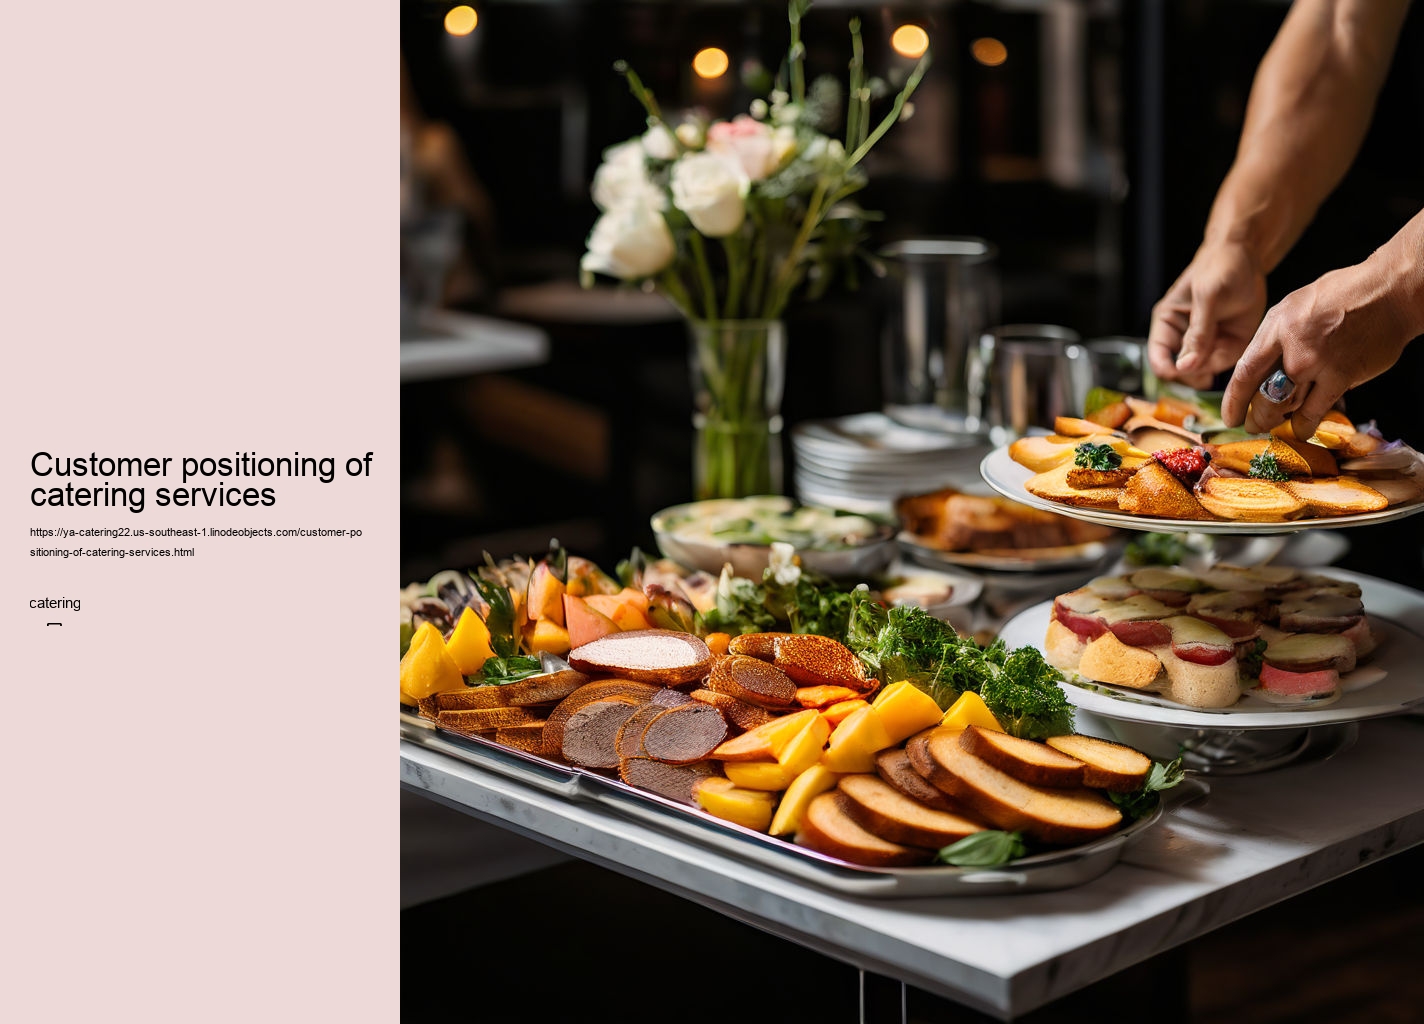 Customer positioning of catering services